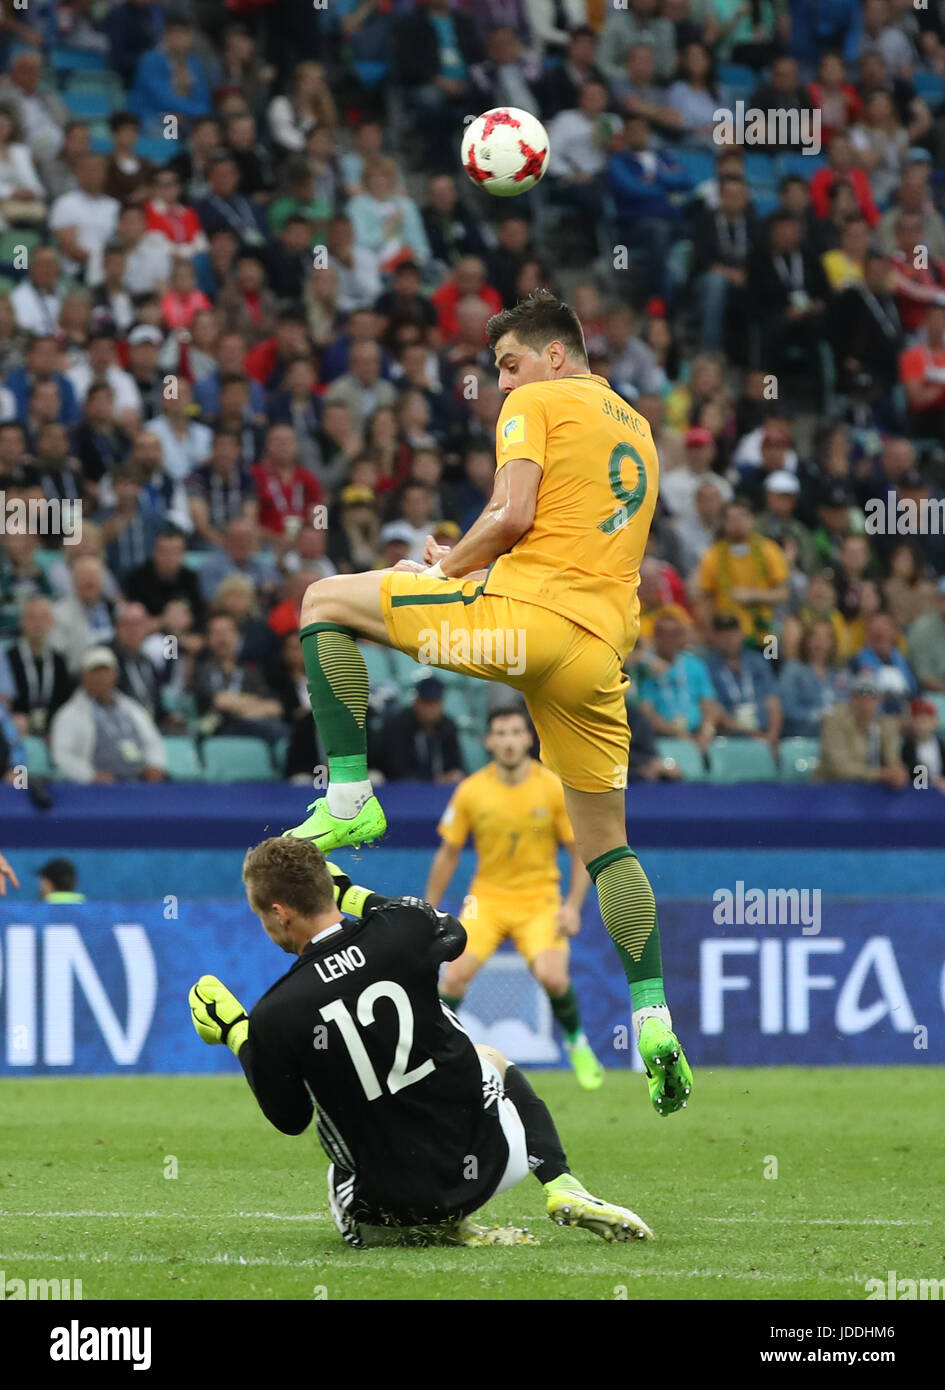 Sochi, Russia. 19th June, 2017. Goalkeeper Kevin Trapp (bottom) of Germany vies with Tomi Juric of Australia during during the group B match between Australia and Germany of the 2017 FIFA Confederations Cup in Sochi, Russia, on June 19, 2017. Germany won 3-2. Credit: Xu Zijian/Xinhua/Alamy Live News Stock Photo